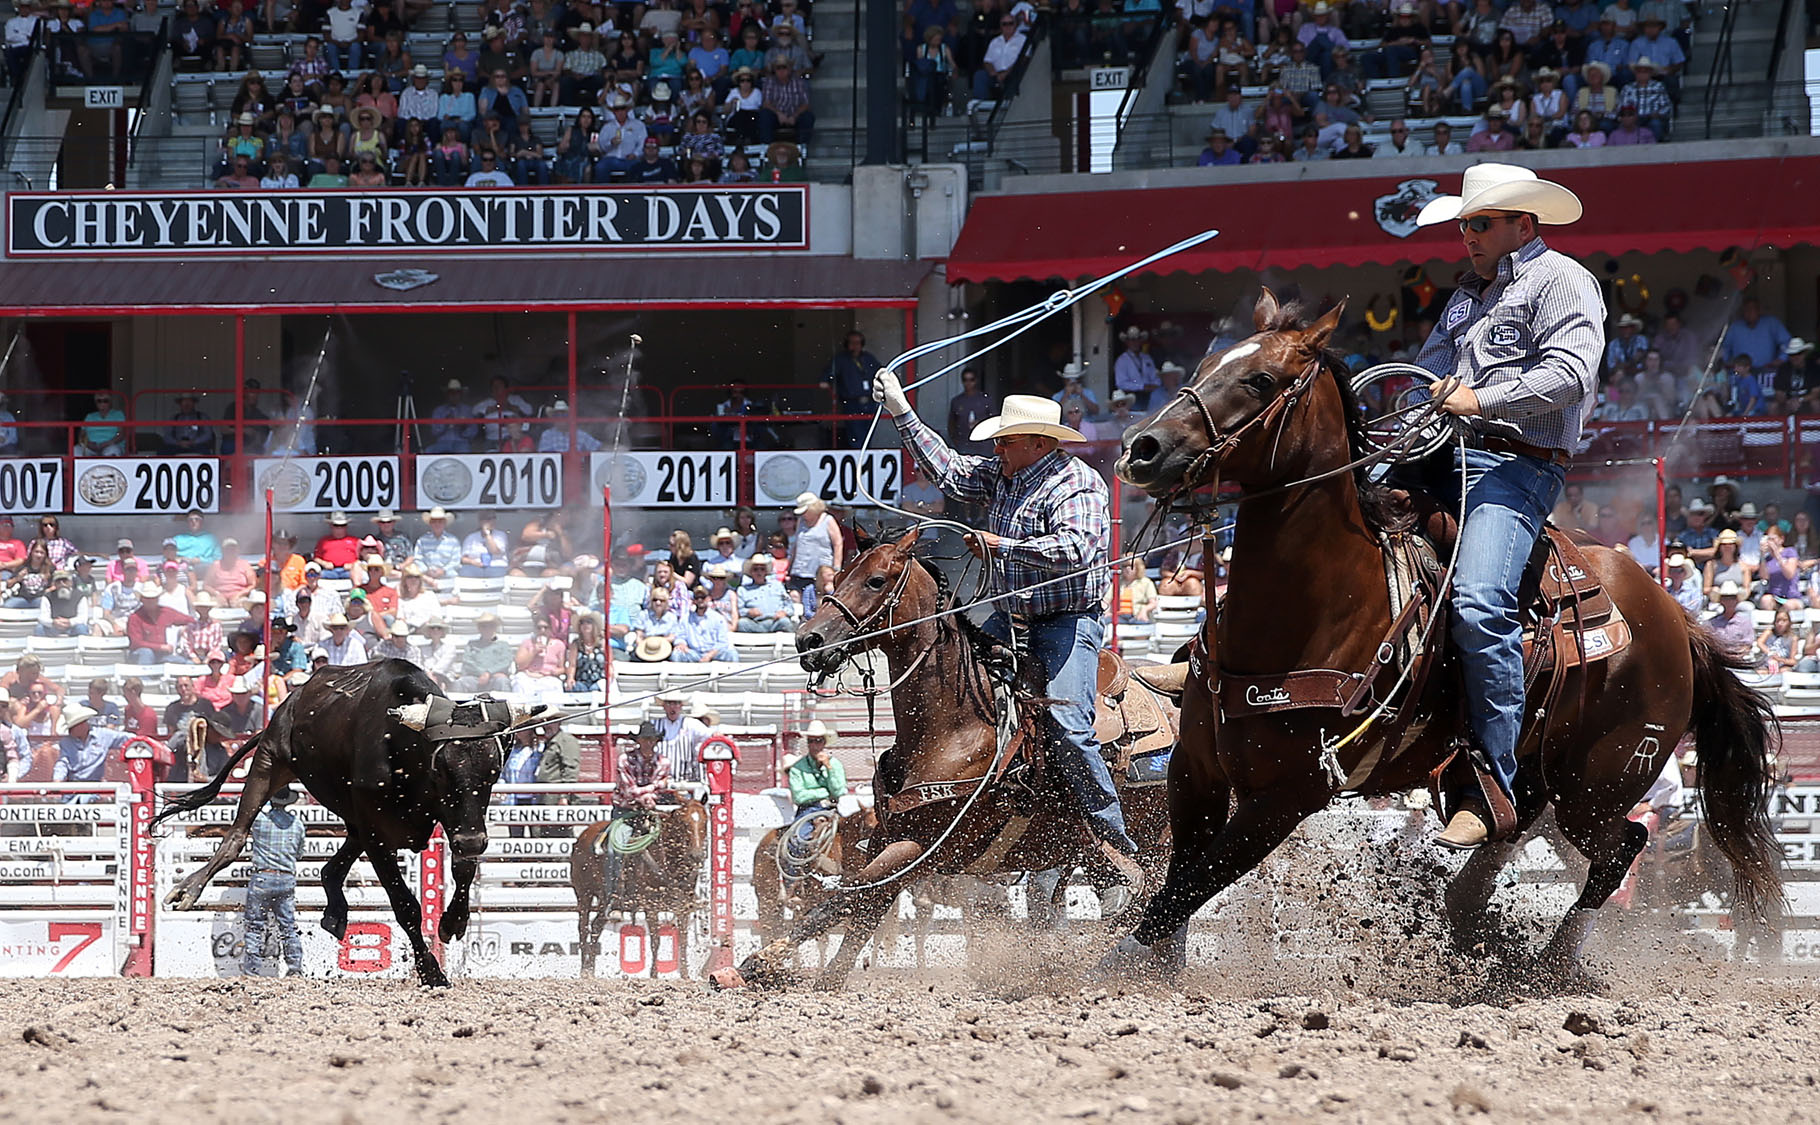 Cheyenne Frontier Days Rodeo in Wyoming